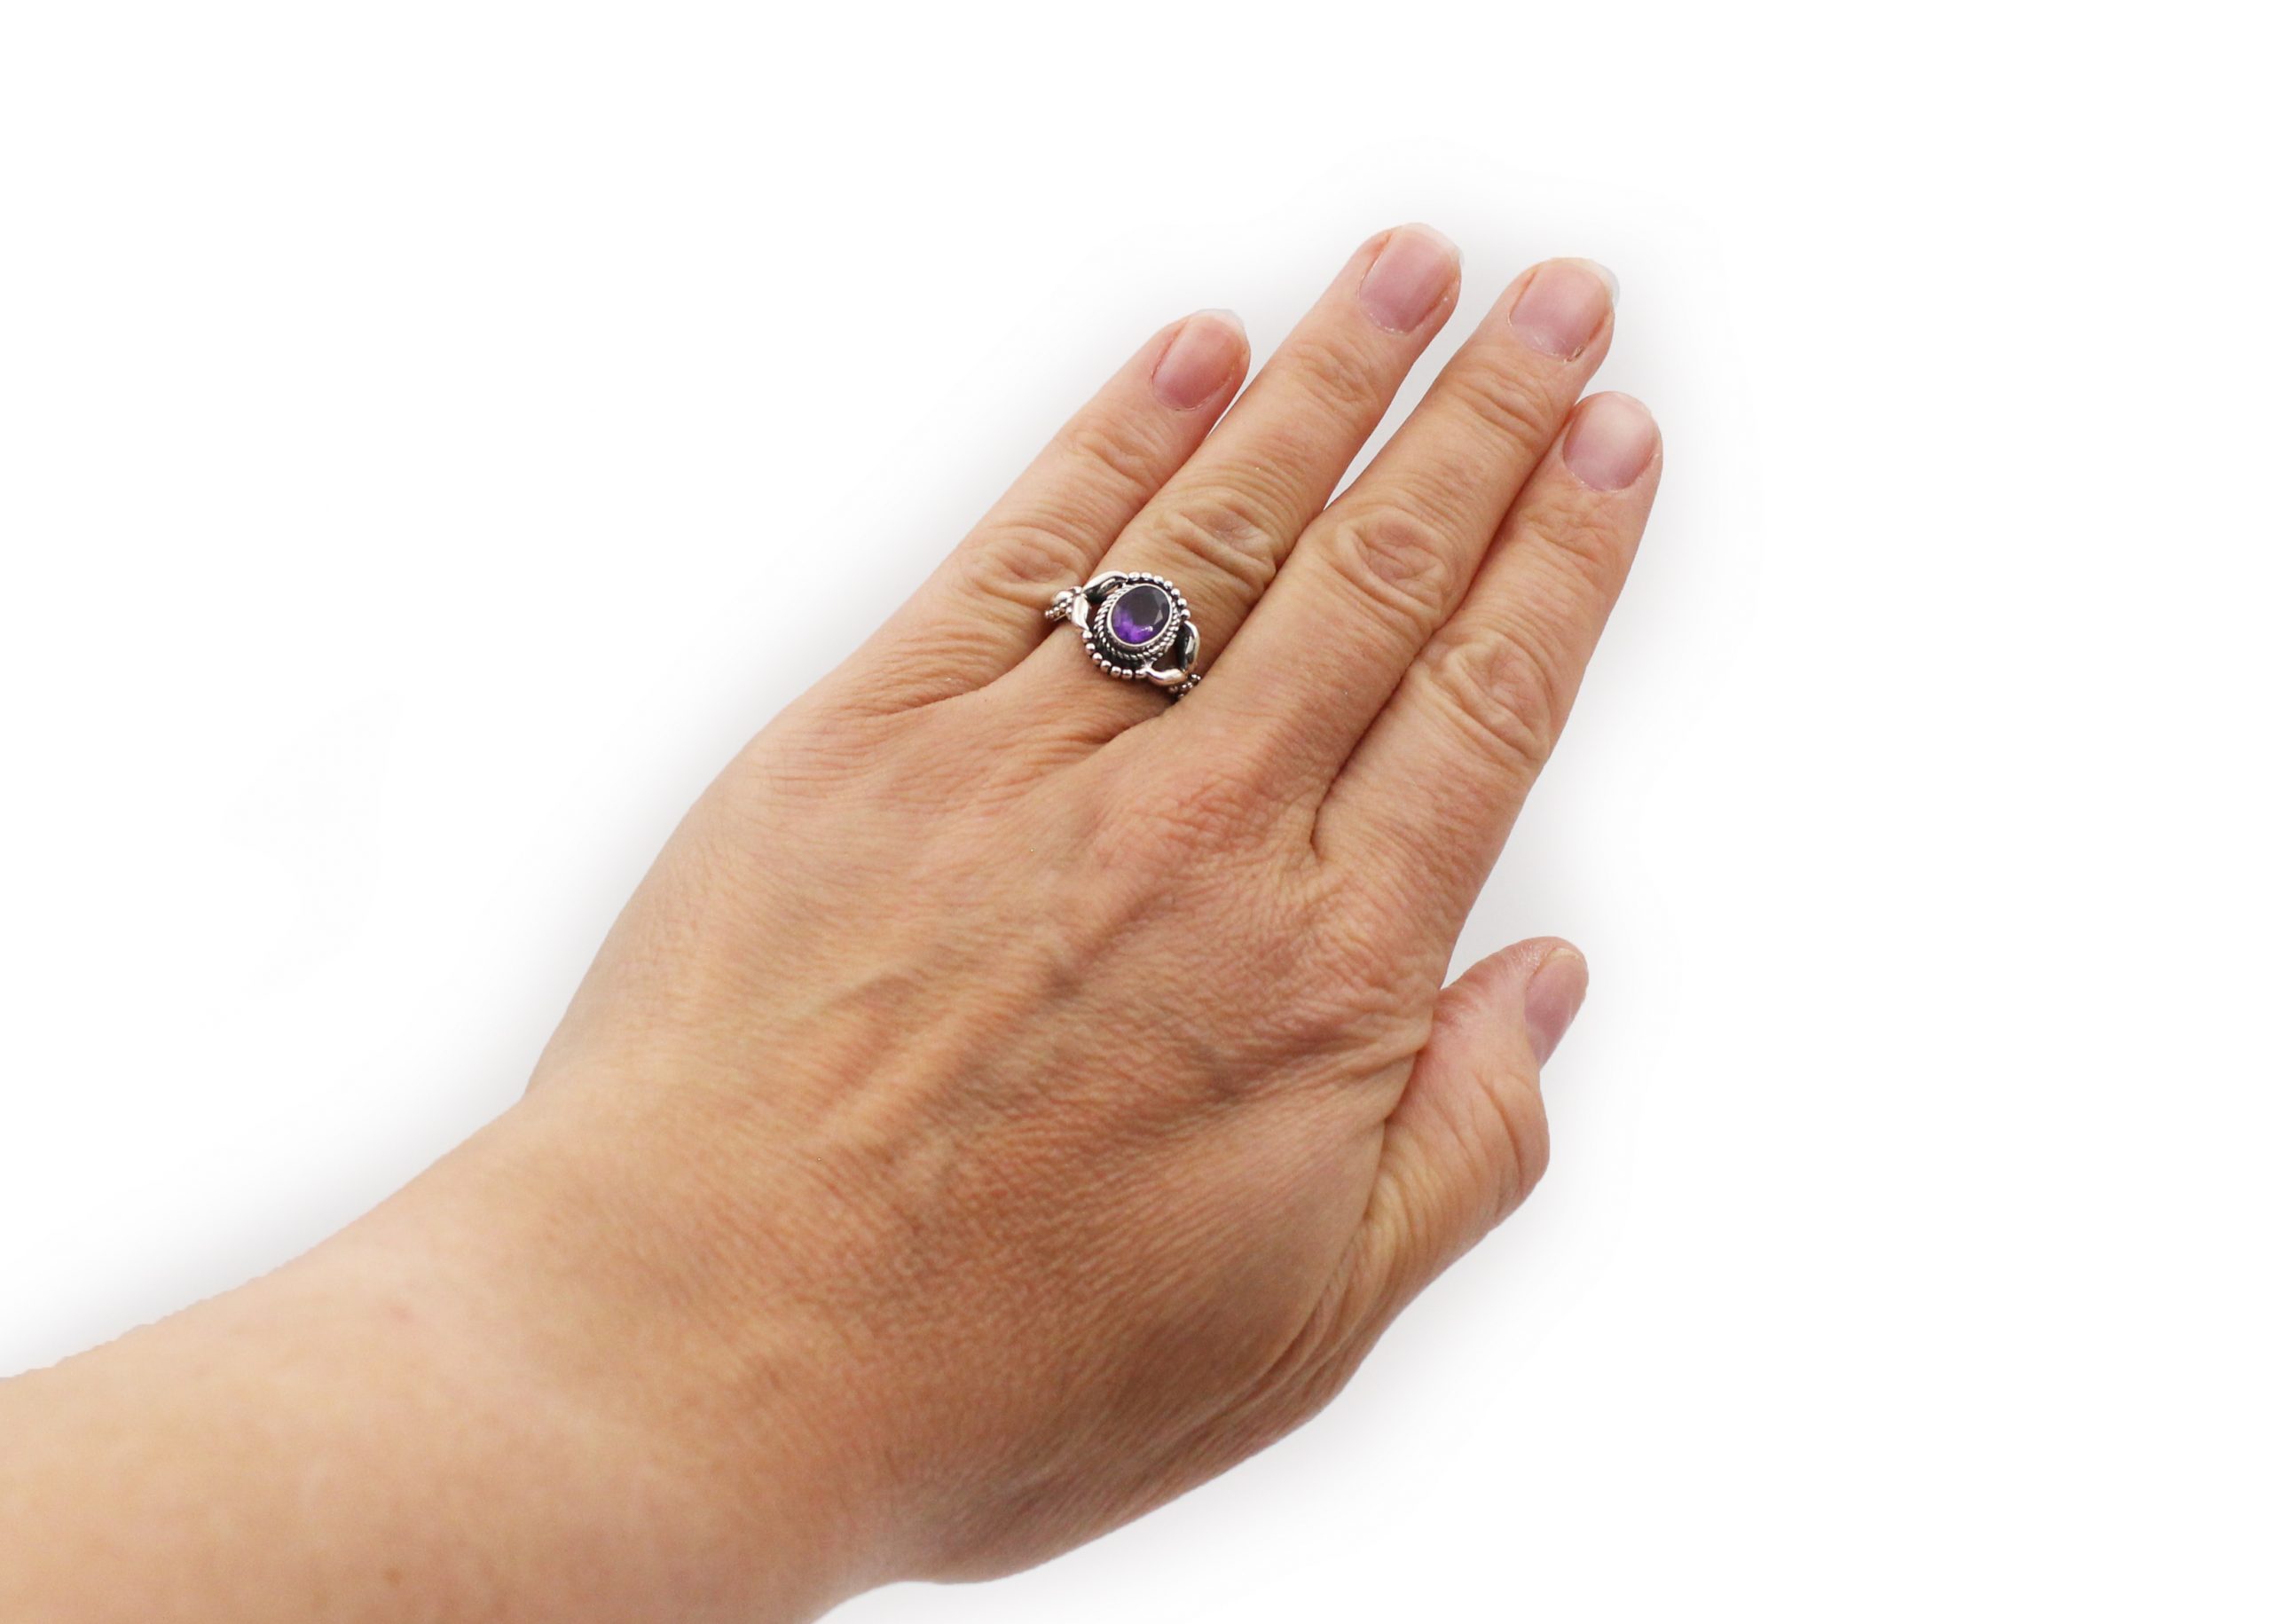 Amethyst Ovated Sterling Silver Ring - Crystal Dreams